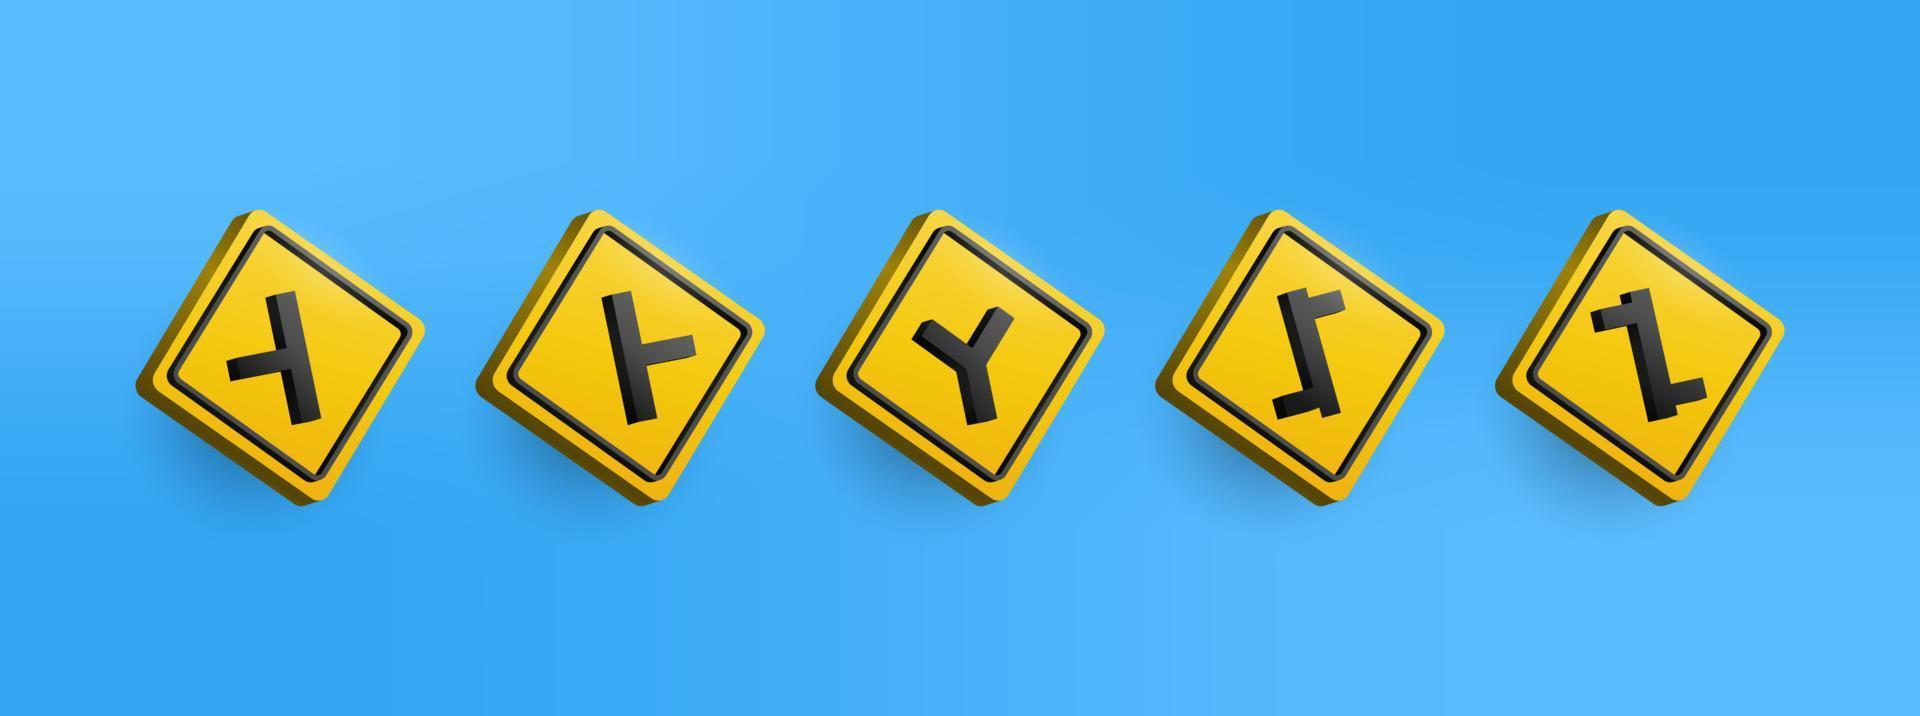 3D yellow Warning traffic sign icon collection set. Vector Illustration of directions traffic sign easy editable